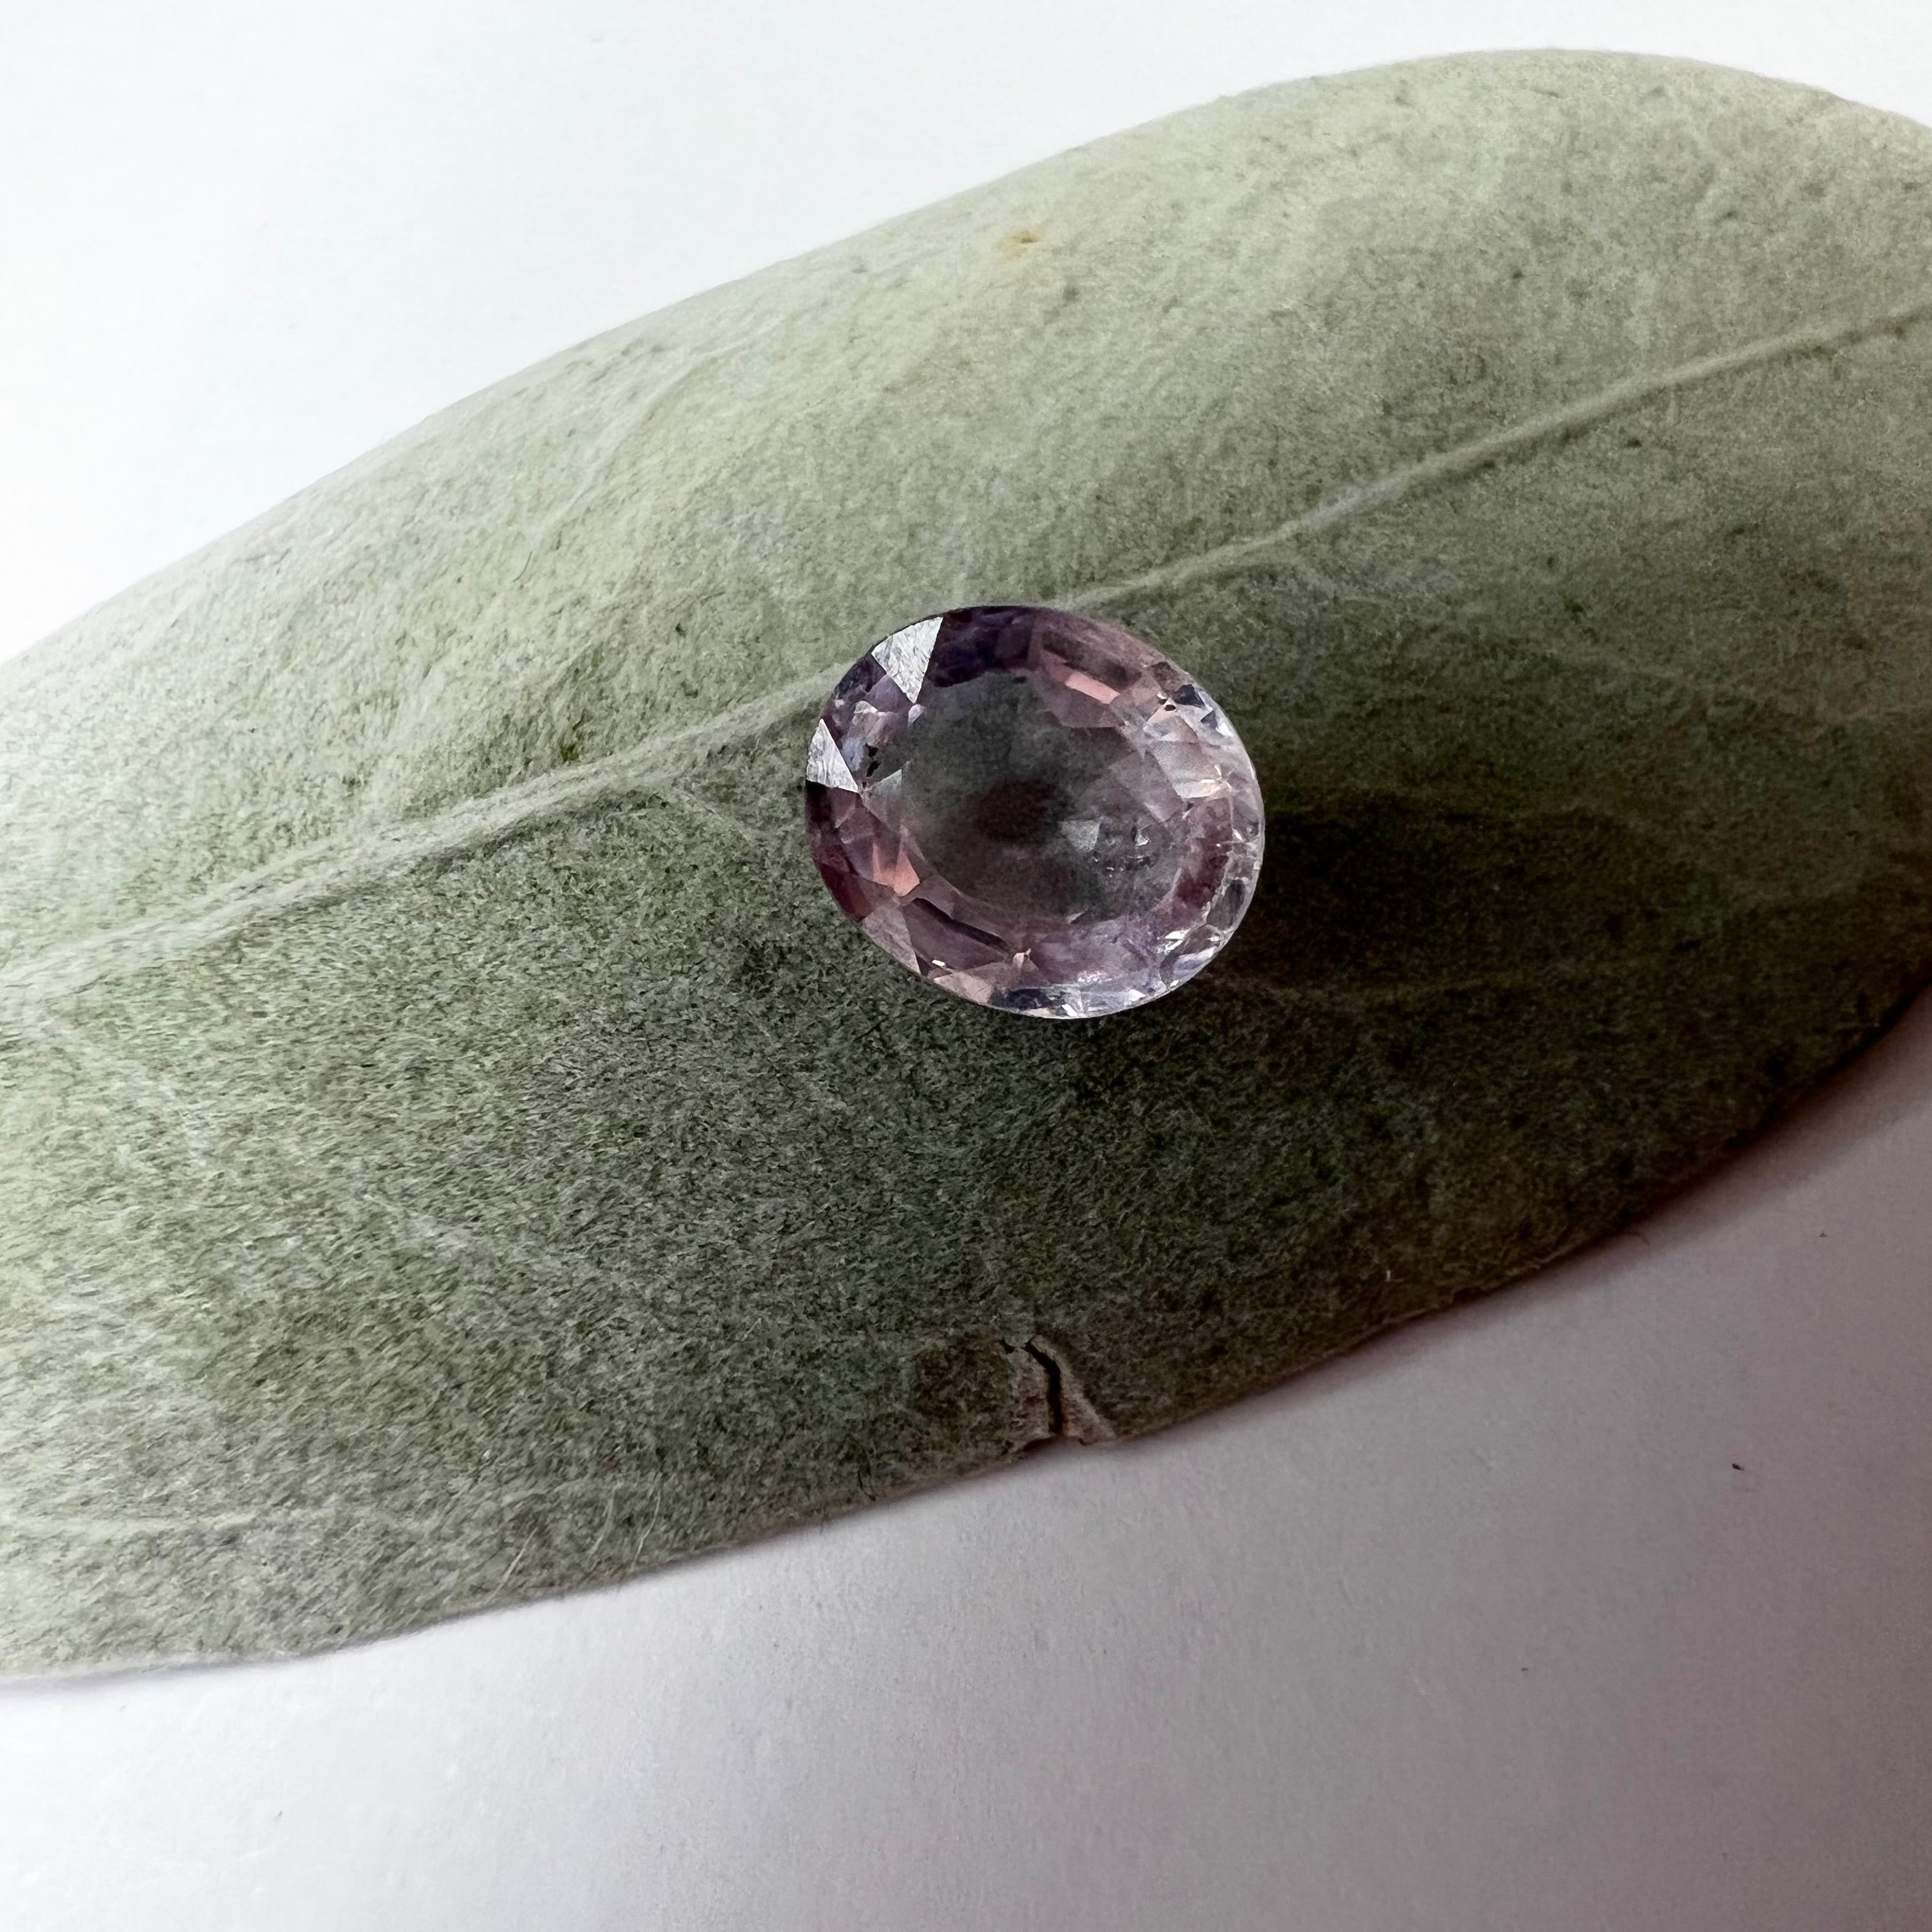 .99CTW Loose Cotton Candy Pink Sapphire 6.40x5.46x2.92mm Earth mined Gemstone